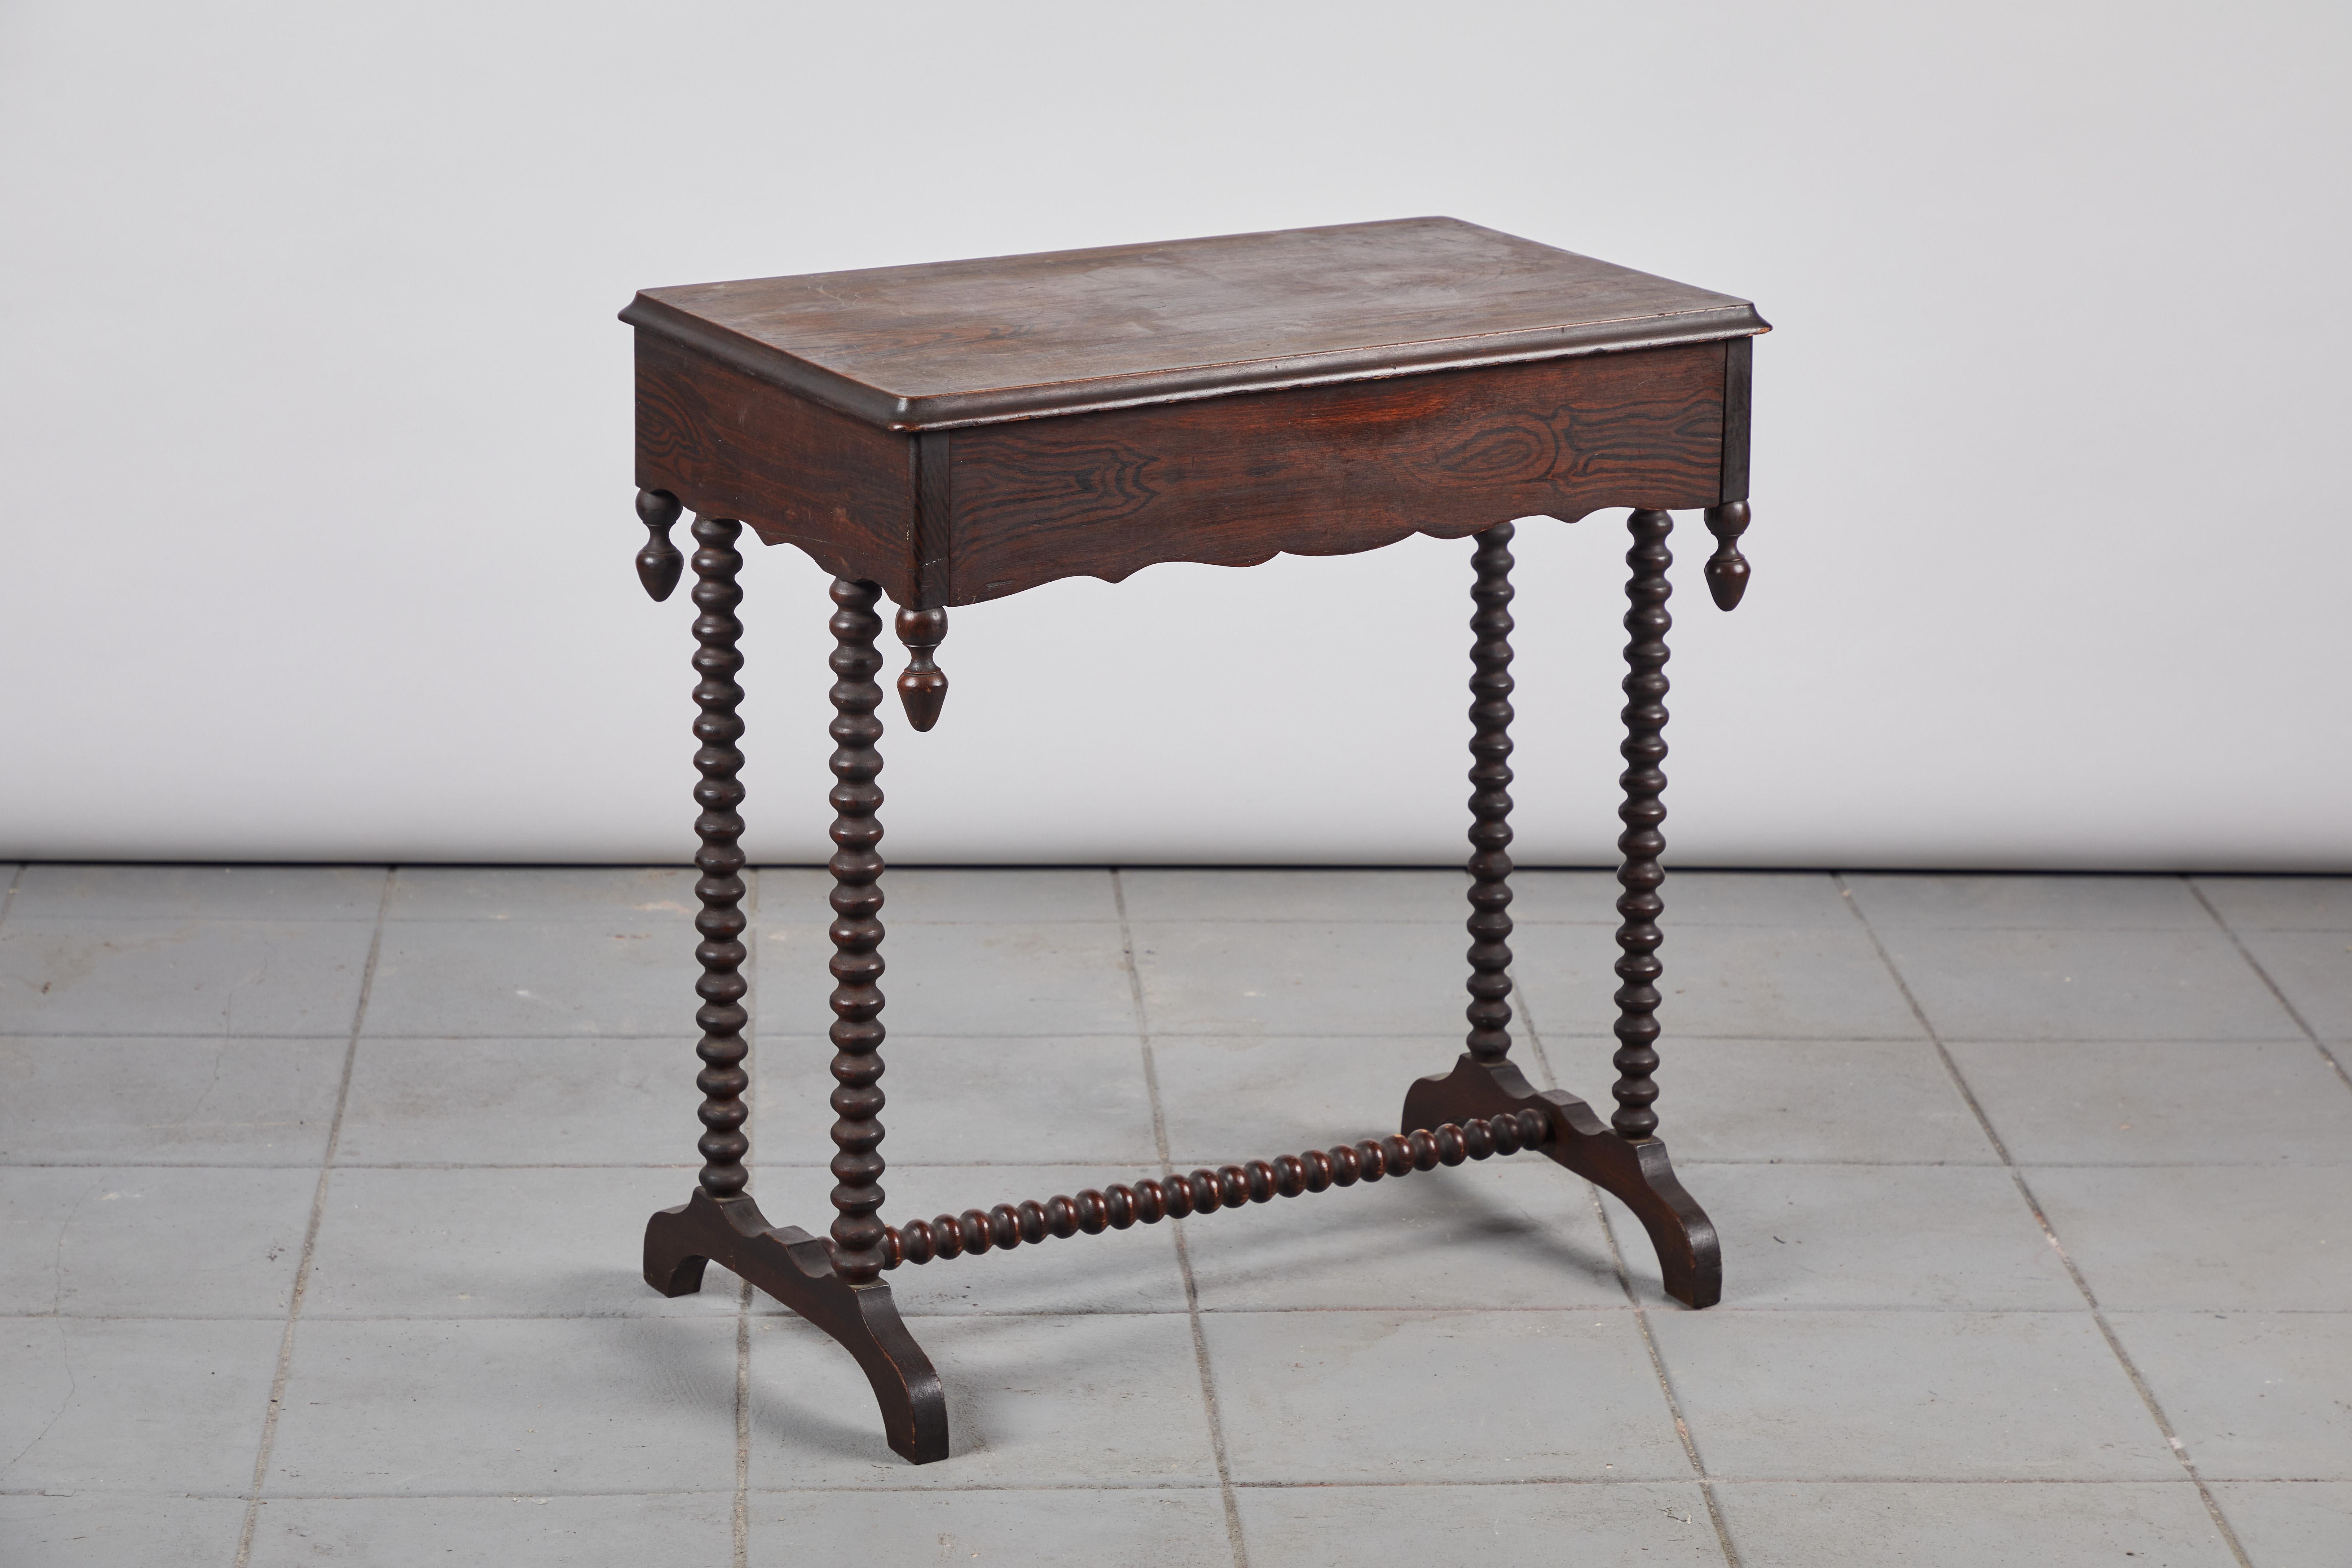 Beautiful early American spindle side table with hidden drawer and scalloped edges. The finish is original.